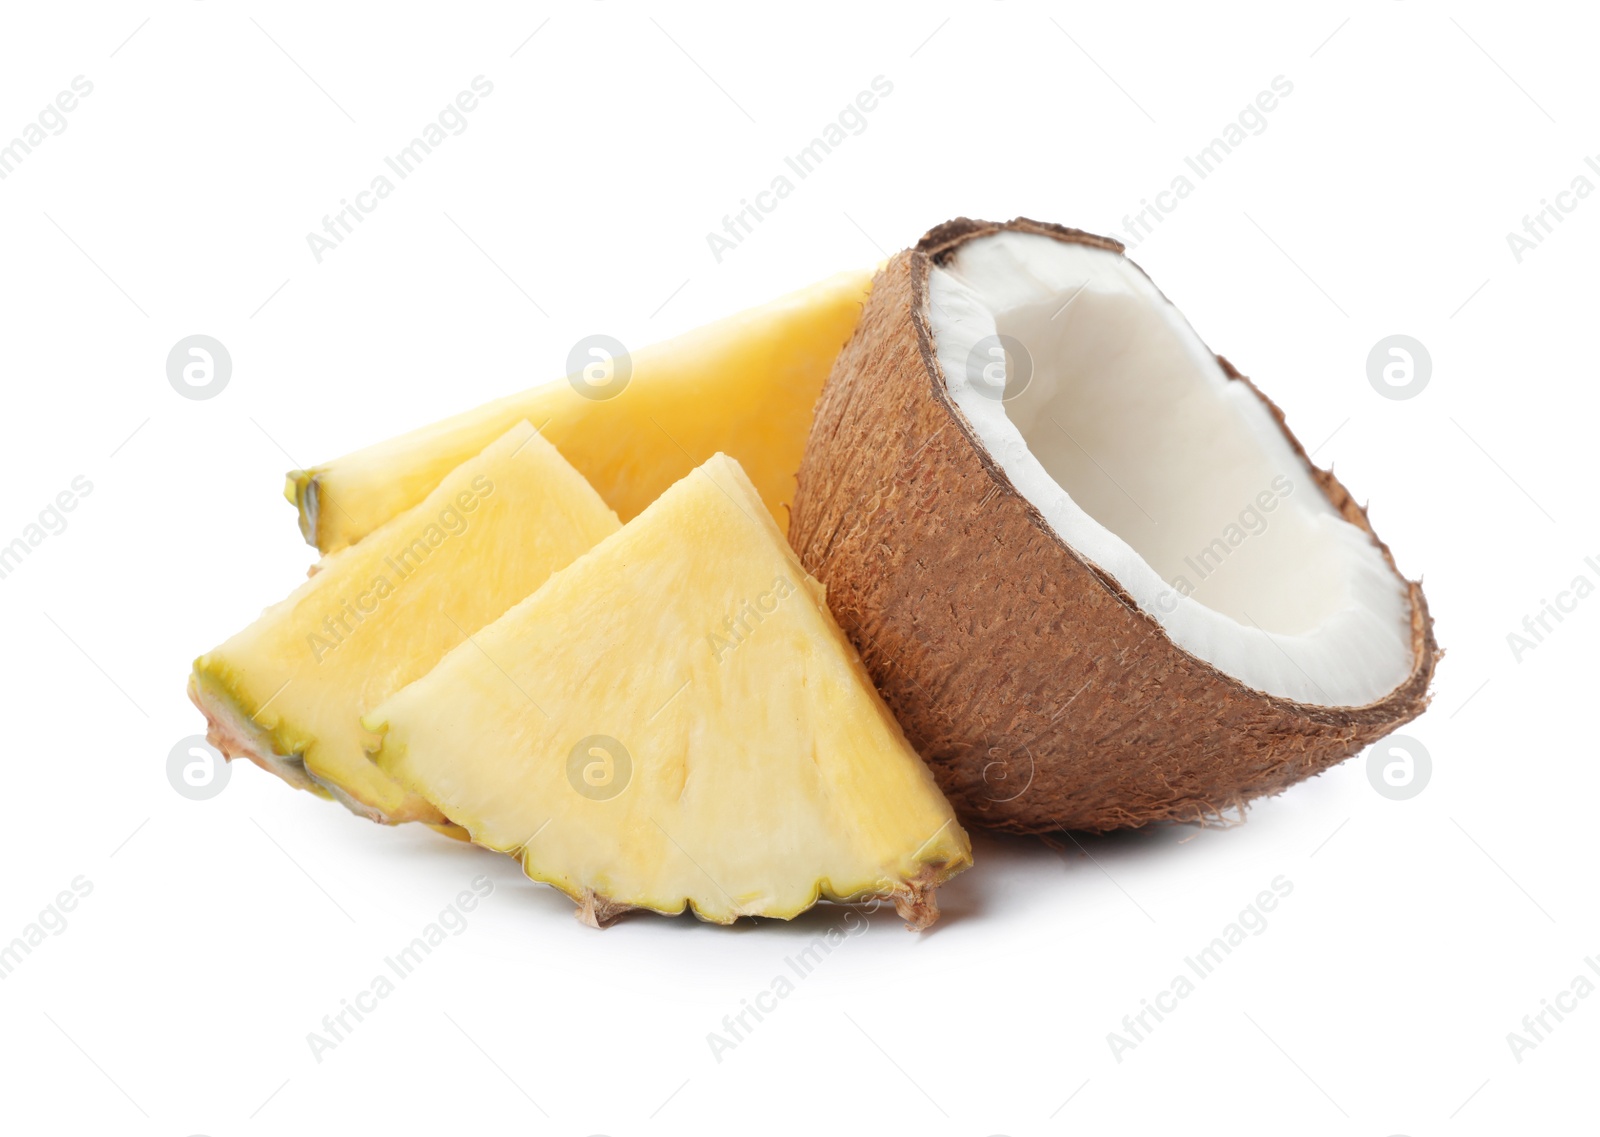 Photo of Tasty raw pineapple slices and coconut on white background